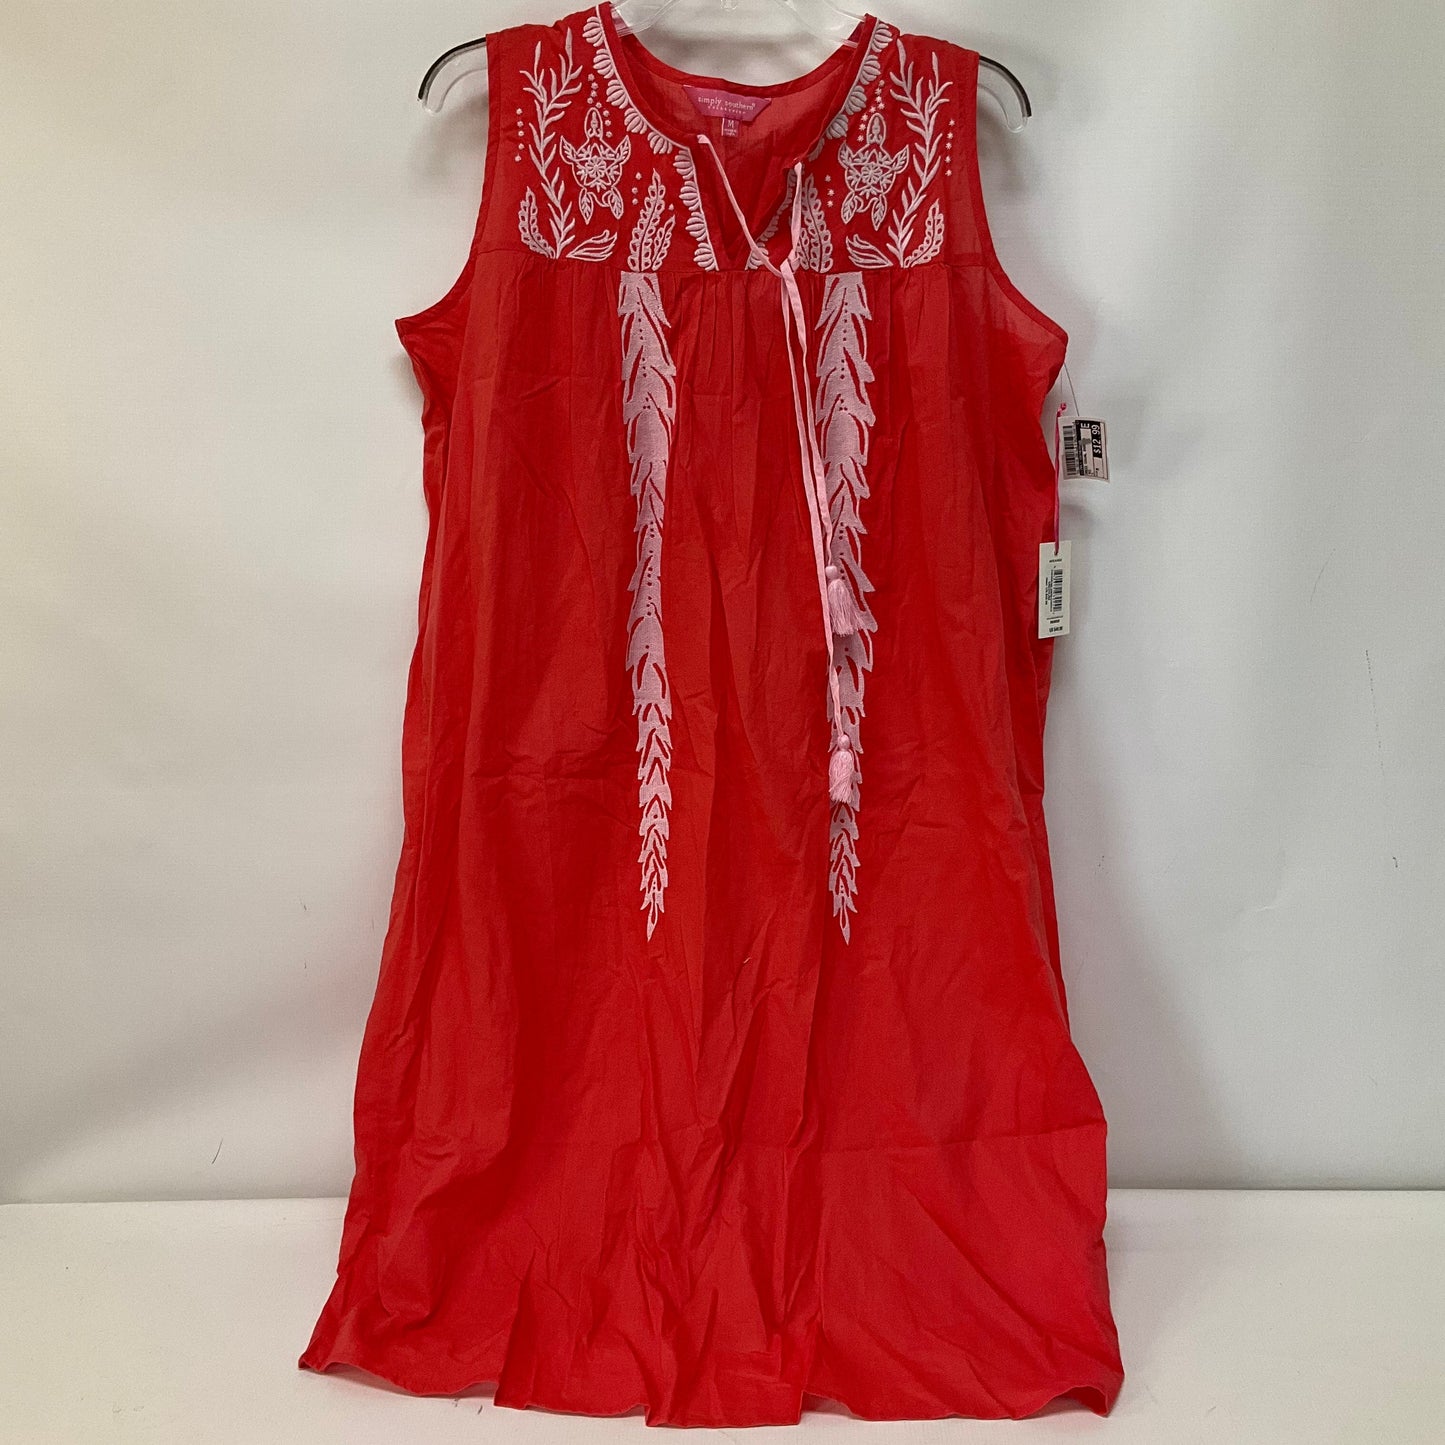 Dress Casual Short By Simply Southern  Size: M